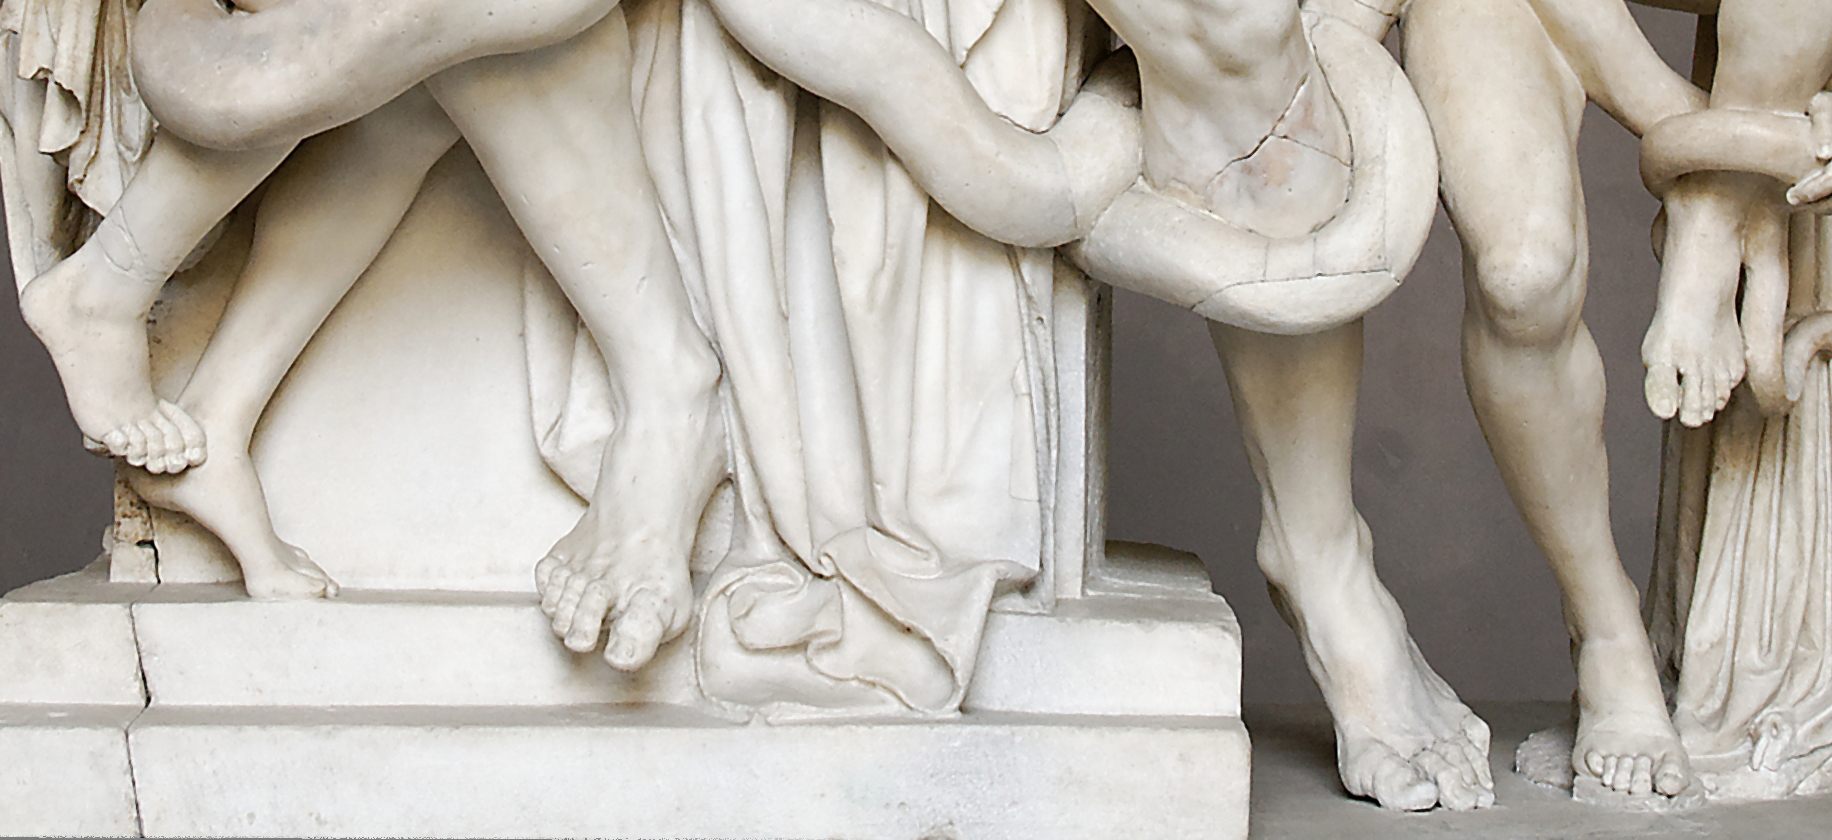 Long second toes on display in an ancient Greek sculpture, <em></div></p><p>Laocoön and his sons</em>.” width=”auto” /></p><p>A couple thousand years earlier, artists in ancient Egypt sculpted toes that tapered gracefully down in size <b>from</b> the big toe to the pinky. Much like the Great Pyramids, where <u>everything</u> was measured and precise, even these small body parts appear—at least to our modern eyes—harmonious and evenly spaced.</p><p>While styles change over time, depicting a longer <b>second</b> toe as the ideal in Classical art might not have been a fluke, and in fact, the phenomenon may have been due to the interest of the Golden Ratio by mathematicians in <strong>ancient</strong> Greece. The Golden Ratio, which appears in geometric patterns in nature such as some of the spirals in seashells and in leaves, was <u>also</u> used by engineers in ancient Egypt, but the first written account of it was by the Greek mathematician, Euclid, and it was during the Classical era when it gained popularity among people within many professions. Later, the proportions Euclid described, which were often considered both divine in their provenance and also aesthetically pleasing, may have inspired the Roman engineer Marcus Vitruvius Pollio to write about what he considered to be the perfect proportions of humans in his book, <em>The Departments of Architecture</em>:</p><blockquote><p><em>Just so the parts of Temples should correspond with each other, and with the whole. The navel is naturally placed in the centre of the human body, and, if in a man lying with his face upward, and his hands and feet extended, from his navel as the centre, a circle be described, it will touch his fingers and toes. It is not alone by a circle, that the human body is thus circumscribed, as may be seen by placing it within a square. For measuring from the feet to the crown of the head, and then across the arms fully extended, we find the latter measure equal to the former; so that lines at right angles to each other, enclosing the figure, will form a square.</em></p></blockquote><p>Although Vitruvius didn’t discuss which fingers and toes are the ones that would touch the circle or the square, 1,500 years later, Leonardo da Vinci drew his famous Vitruvian Man—whose long second toes align perfectly with the circle drawn around him. Some art historians believe da Vinci was inspired by the Golden Ratio, but others have demonstrated that while the numbers are very close, the equations don’t exactly match.</p><p><div style=